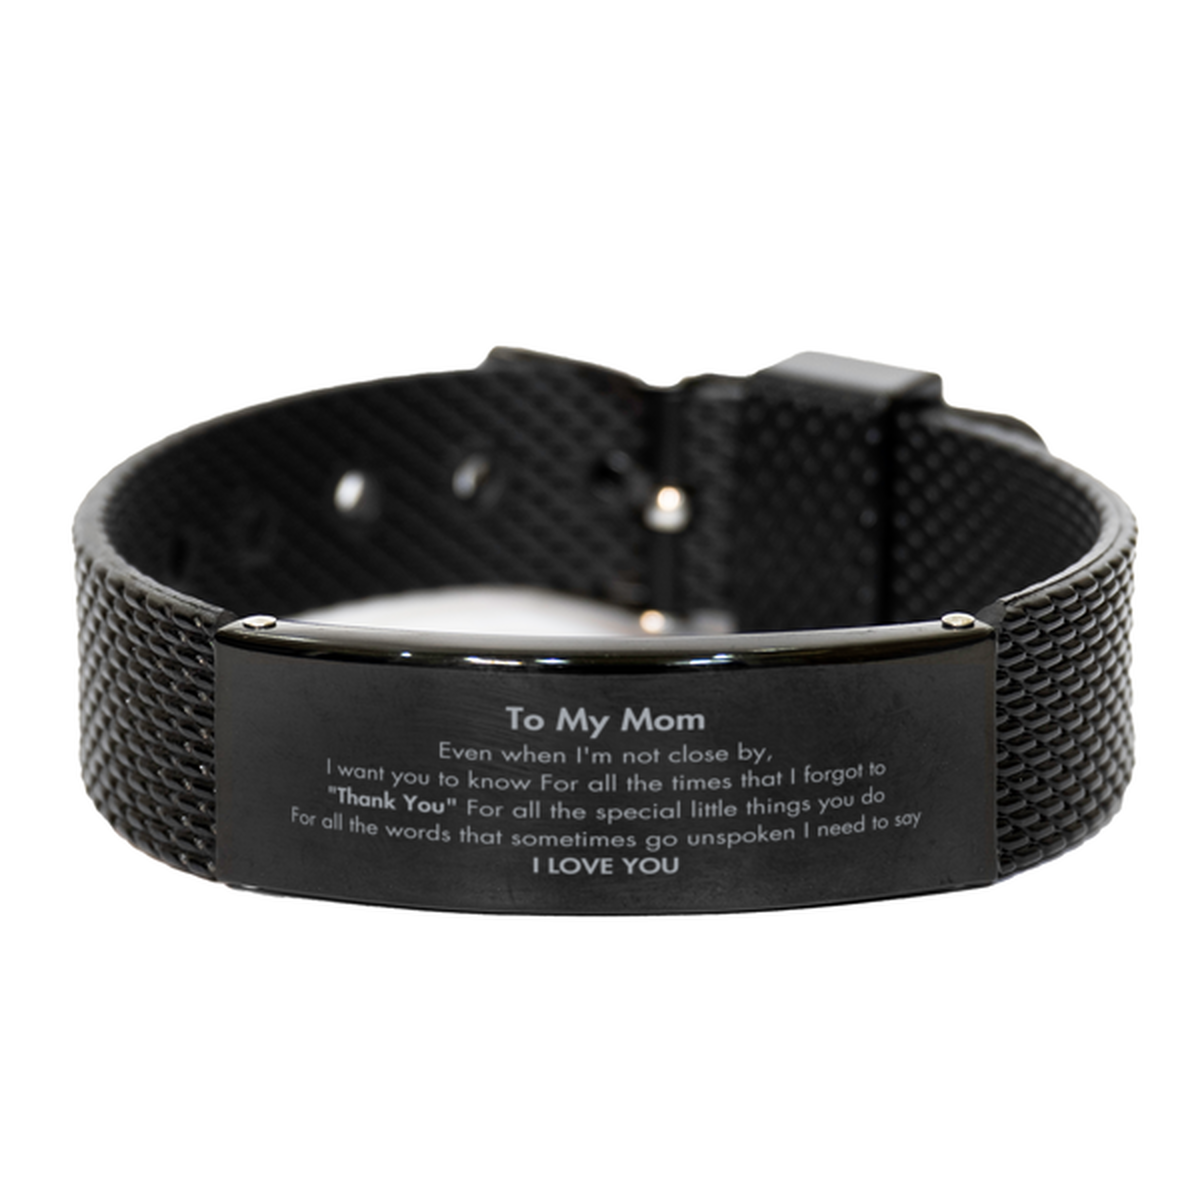 Thank You Gifts for Mom, Keepsake Black Shark Mesh Bracelet Gifts for Mom Birthday Mother's day Father's Day Mom For all the words That sometimes go unspoken I need to say I LOVE YOU